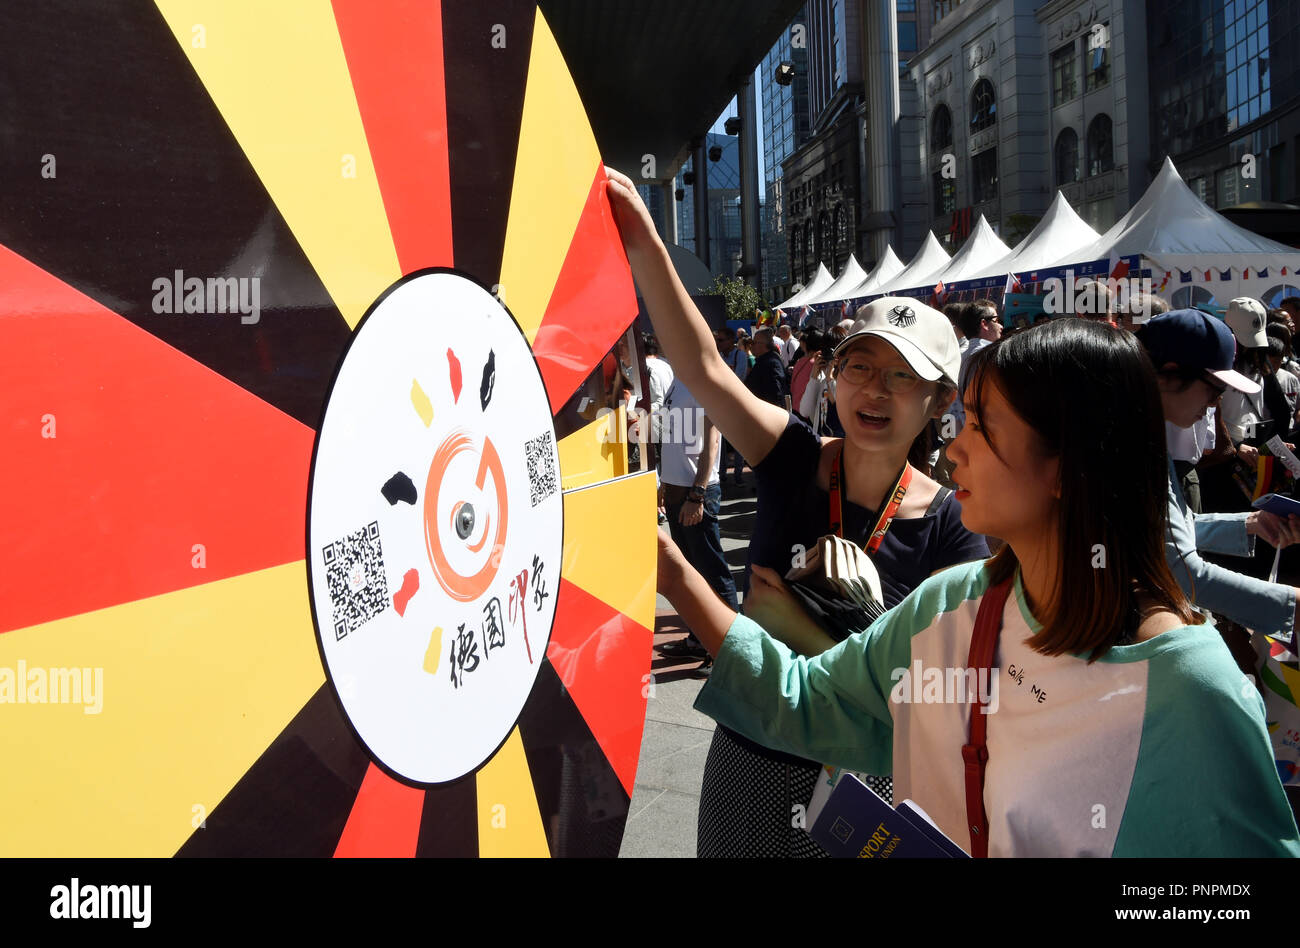 Beijing, China. 22nd Sep, 2018. A visitor turns a turntable in front of the Germany booth during the 'European-Style Street' cultural event held in Beijing, capital of China, Sept. 22, 2018. Exhibitors from the EU member countries present their various cultures during the event sponsored by the EU delegation to China. Credit: Ma Ning/Xinhua/Alamy Live News Stock Photo